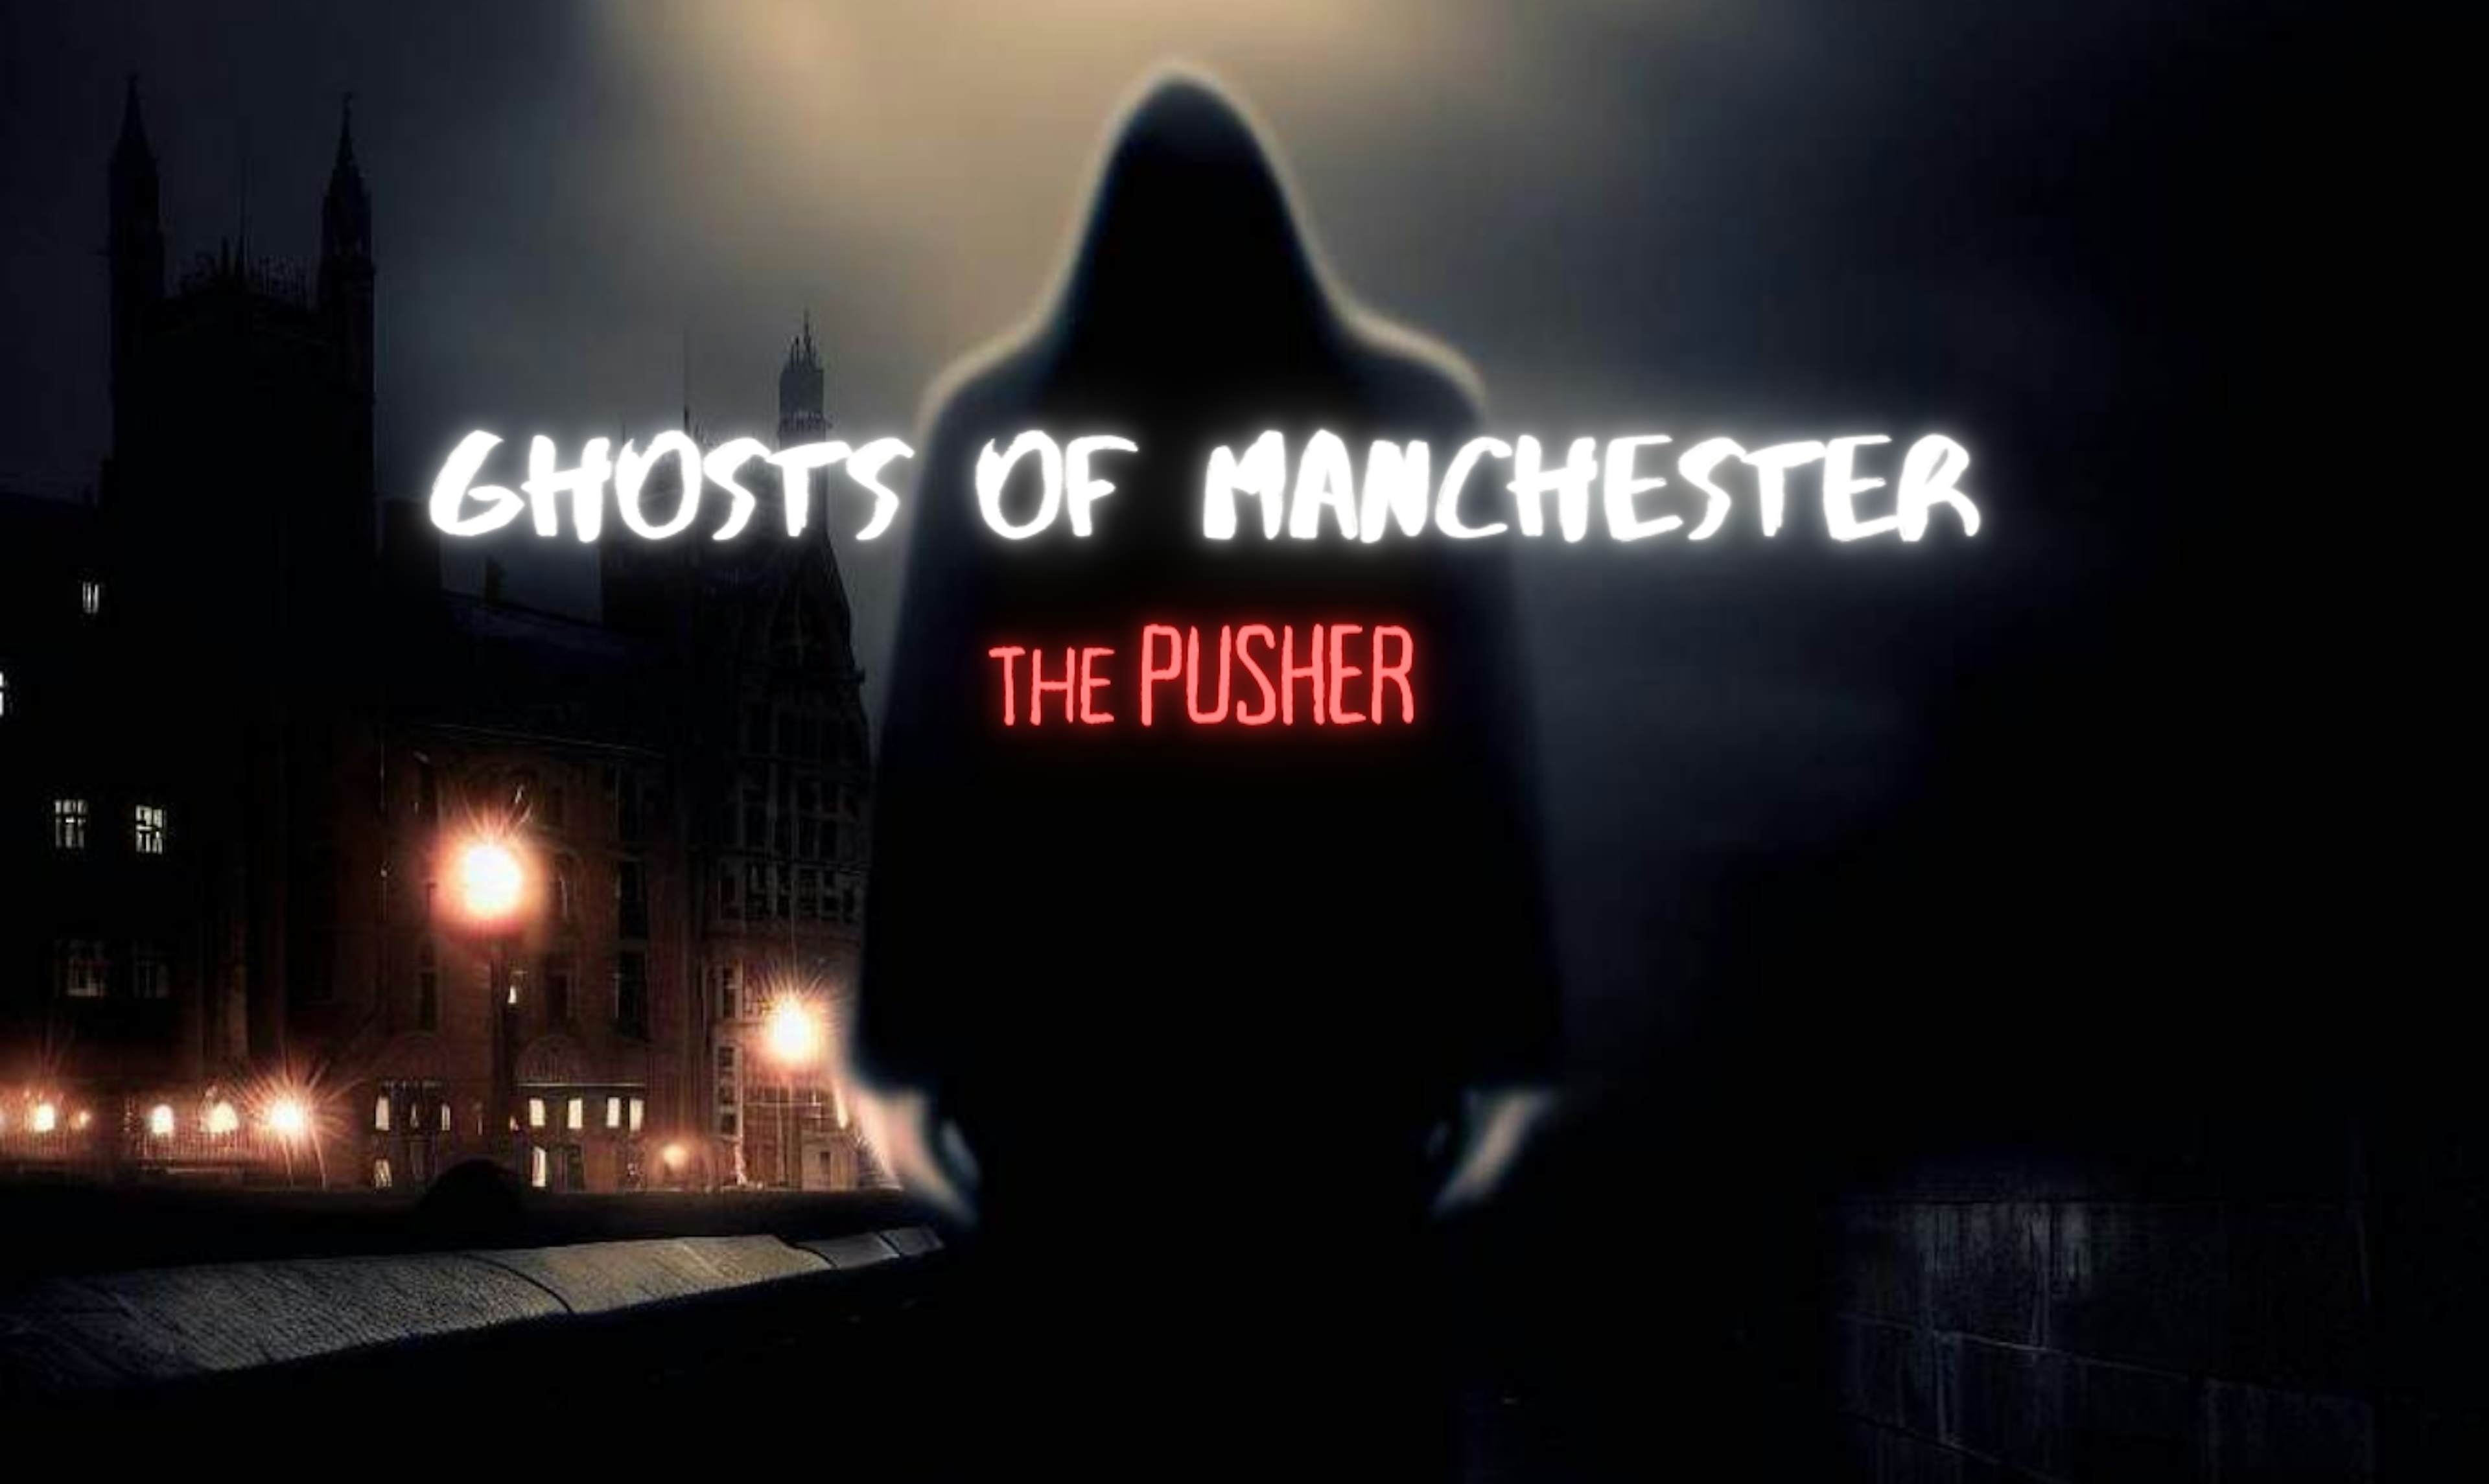 Ghosts of Manchester: The Pusher